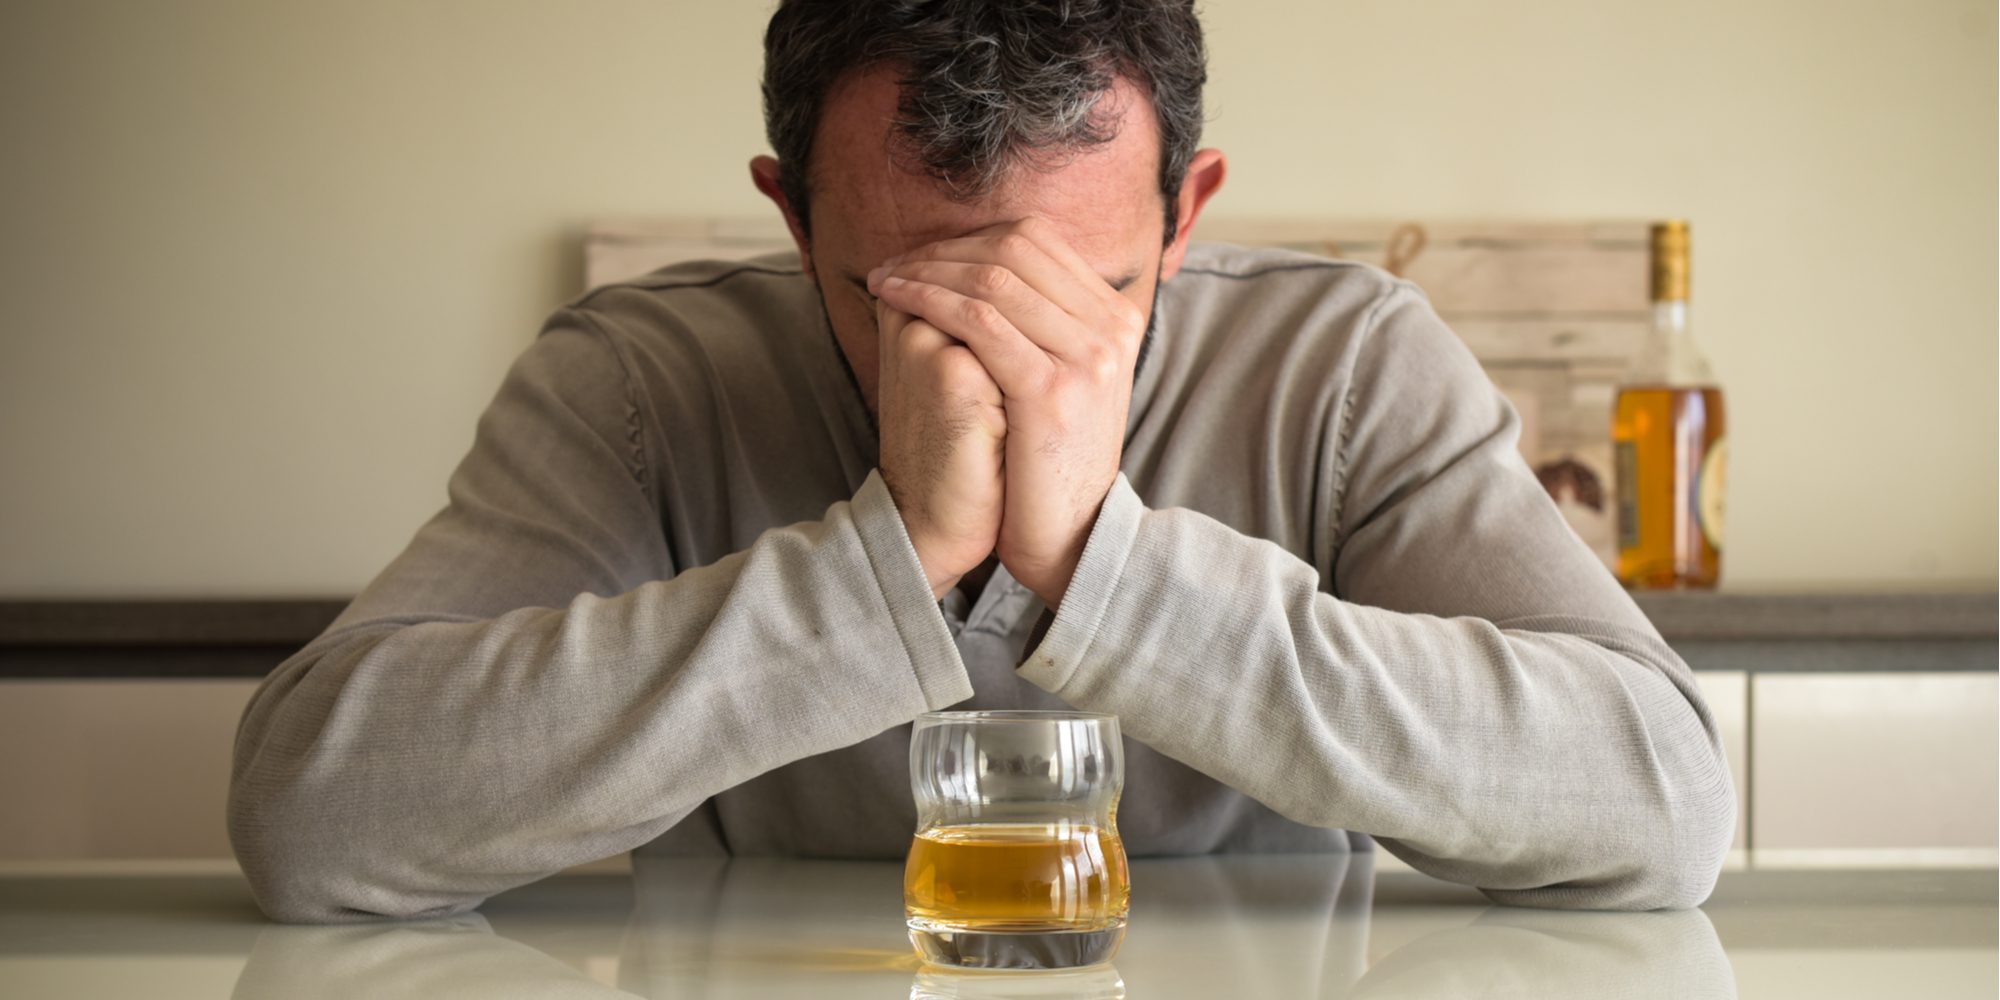 PTSD and alcohol